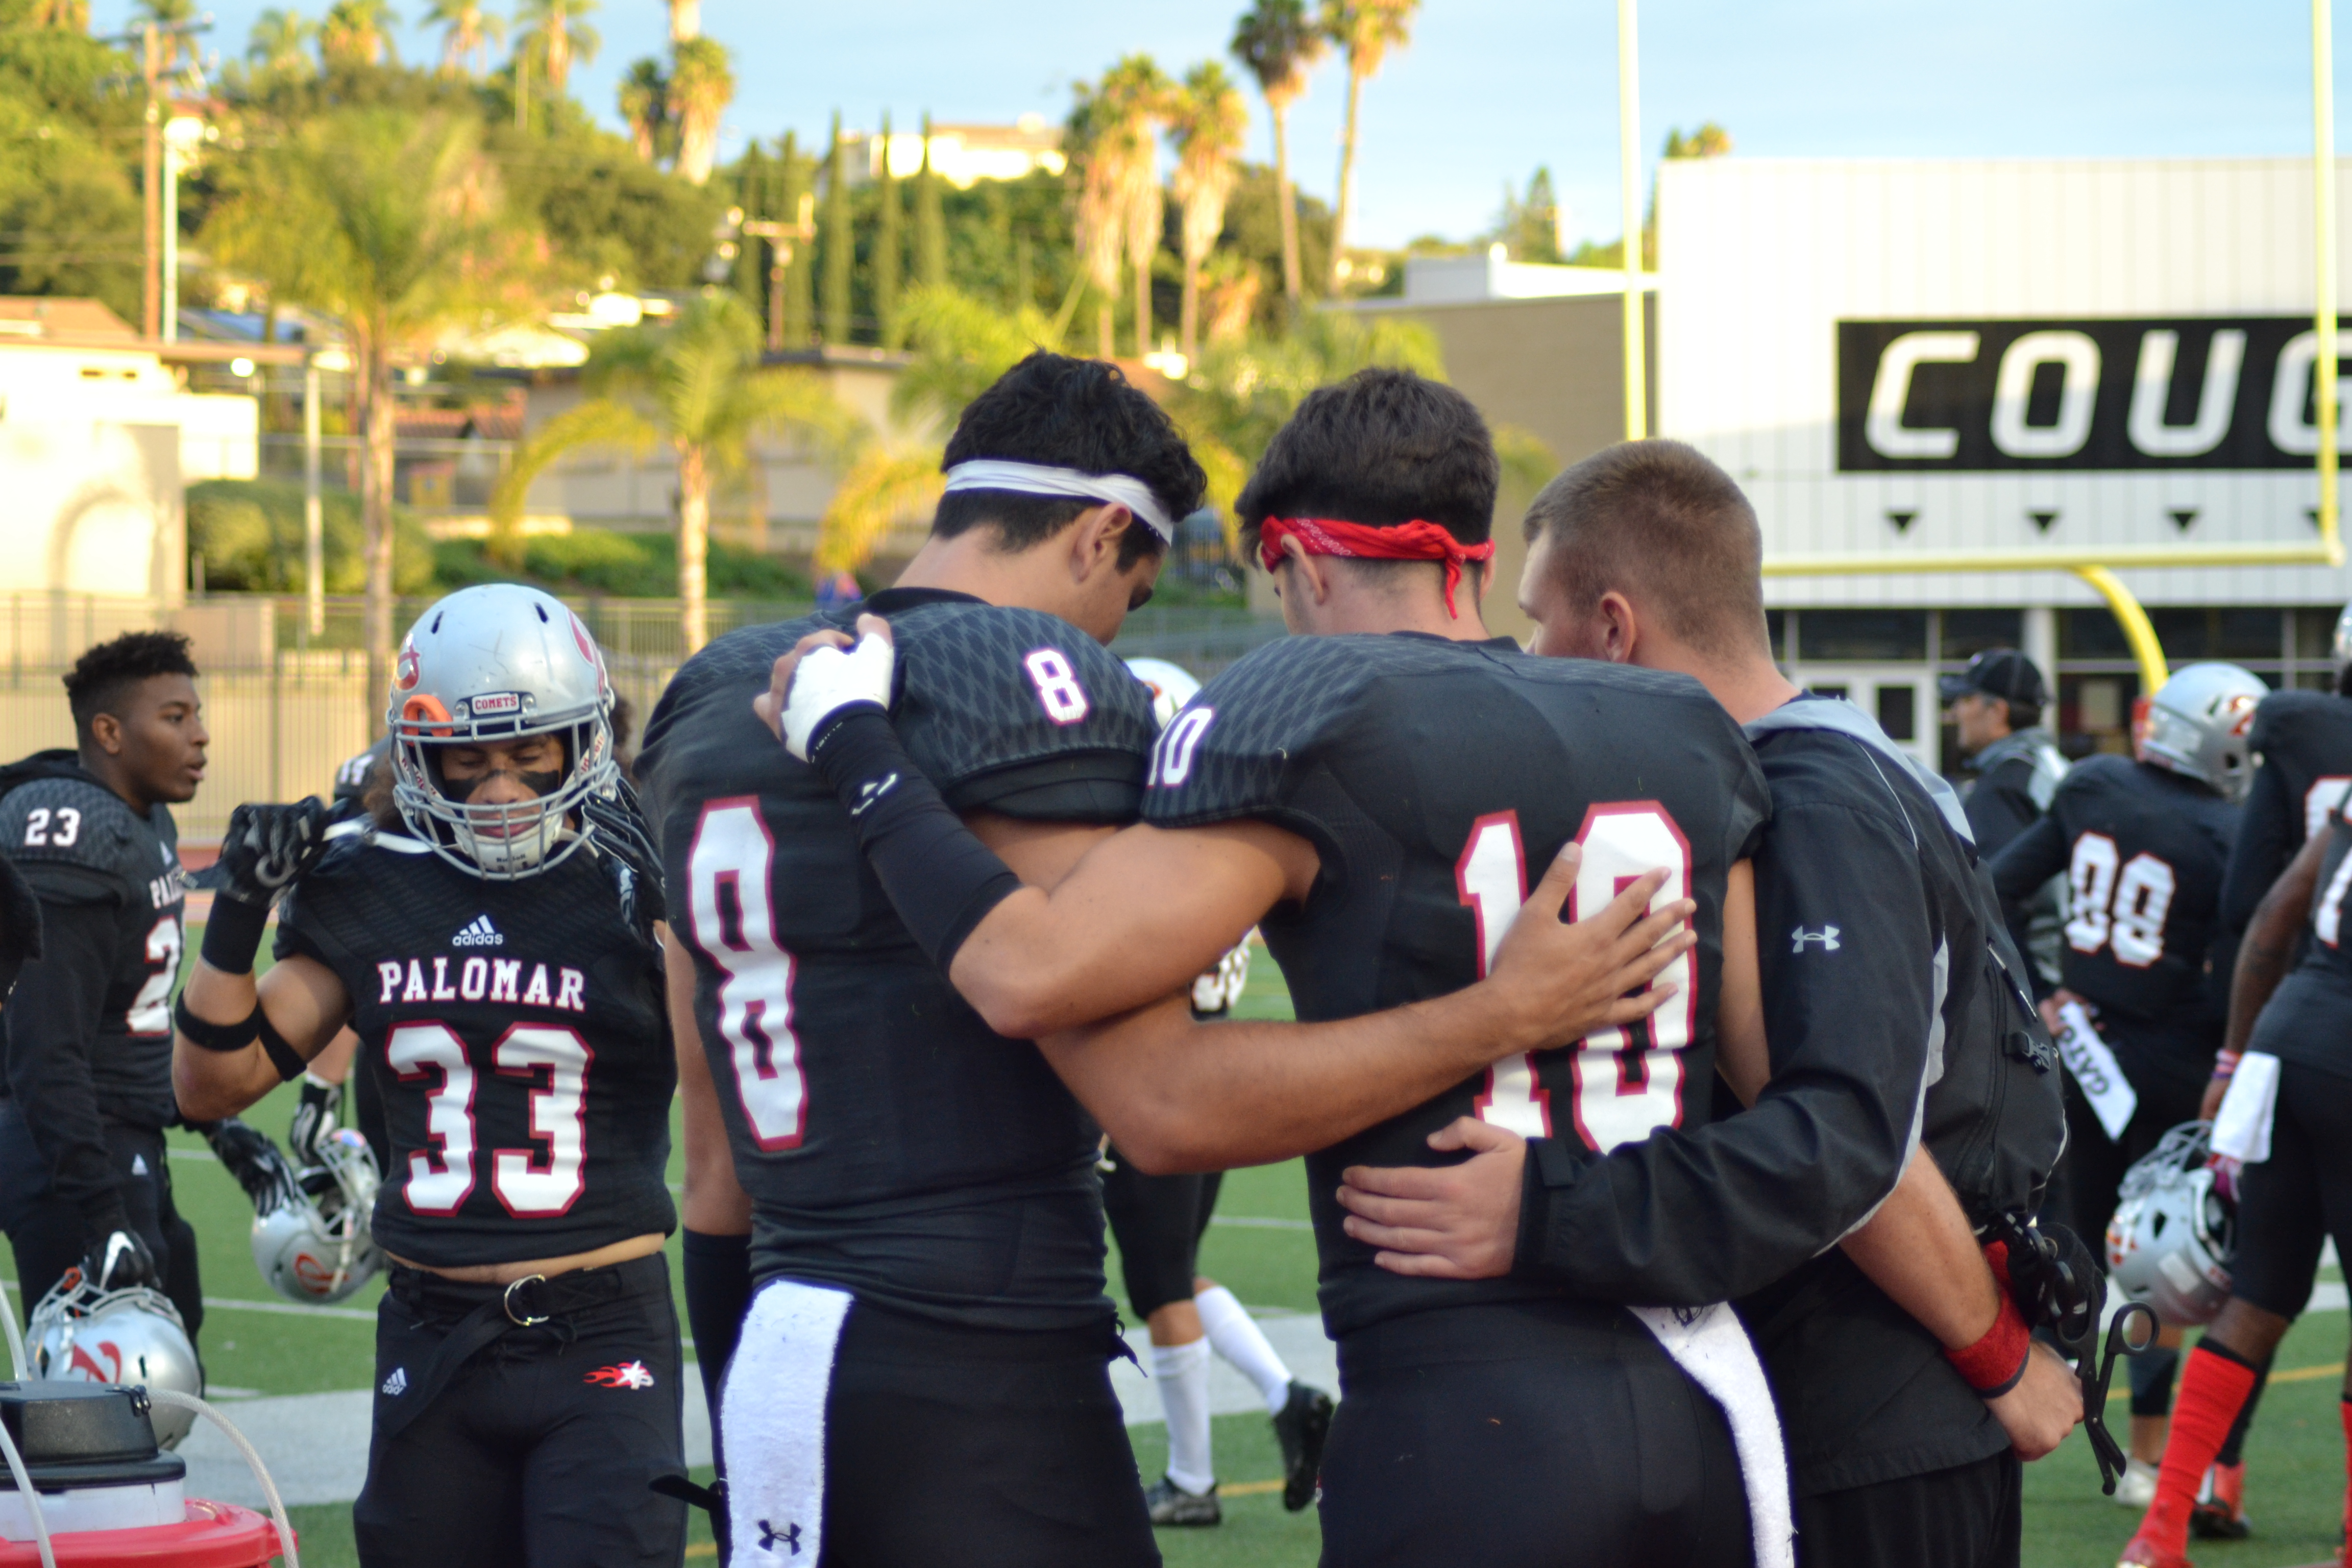 Three Palomar football players huddle with their arms around each others' back and waist. Several players mill around them on the field.